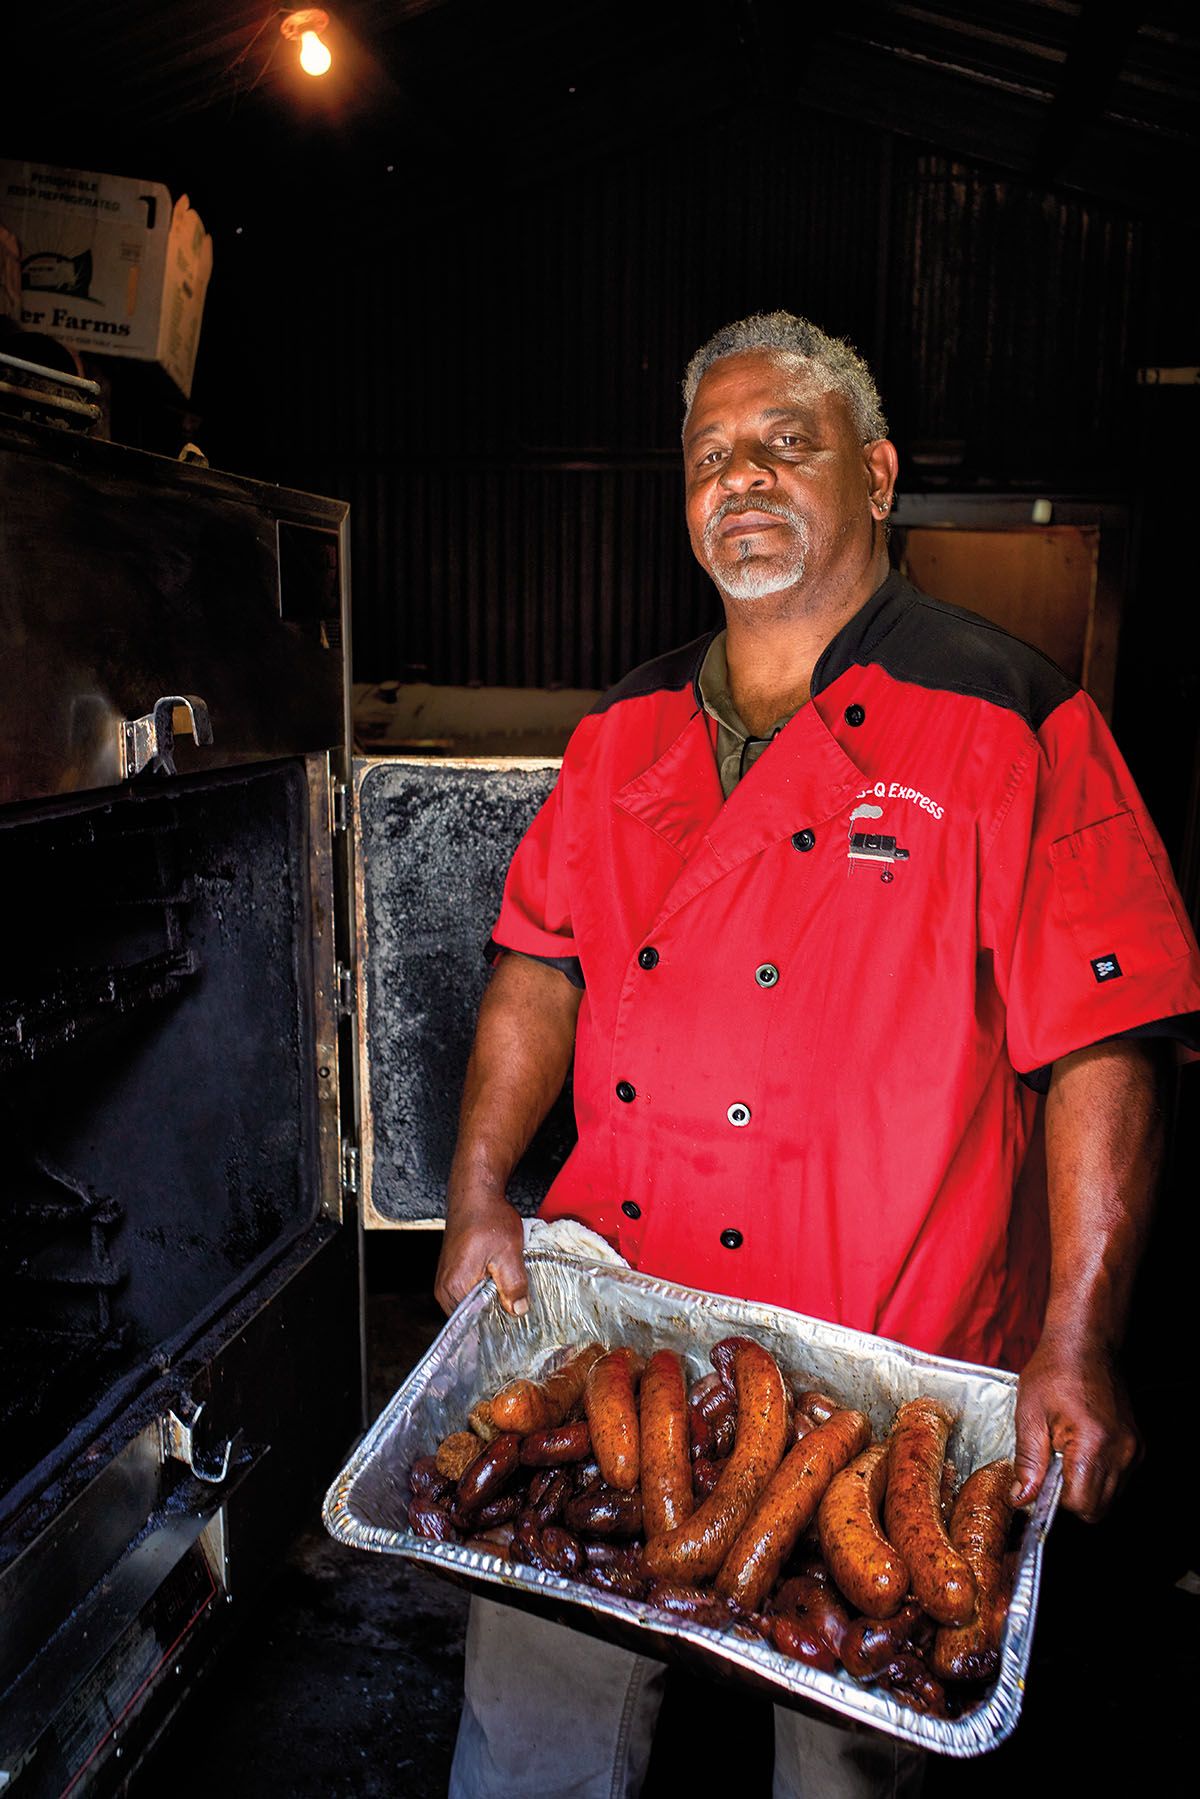 A man in a red shirt stands holding a large tray of sausage in front of a smoker